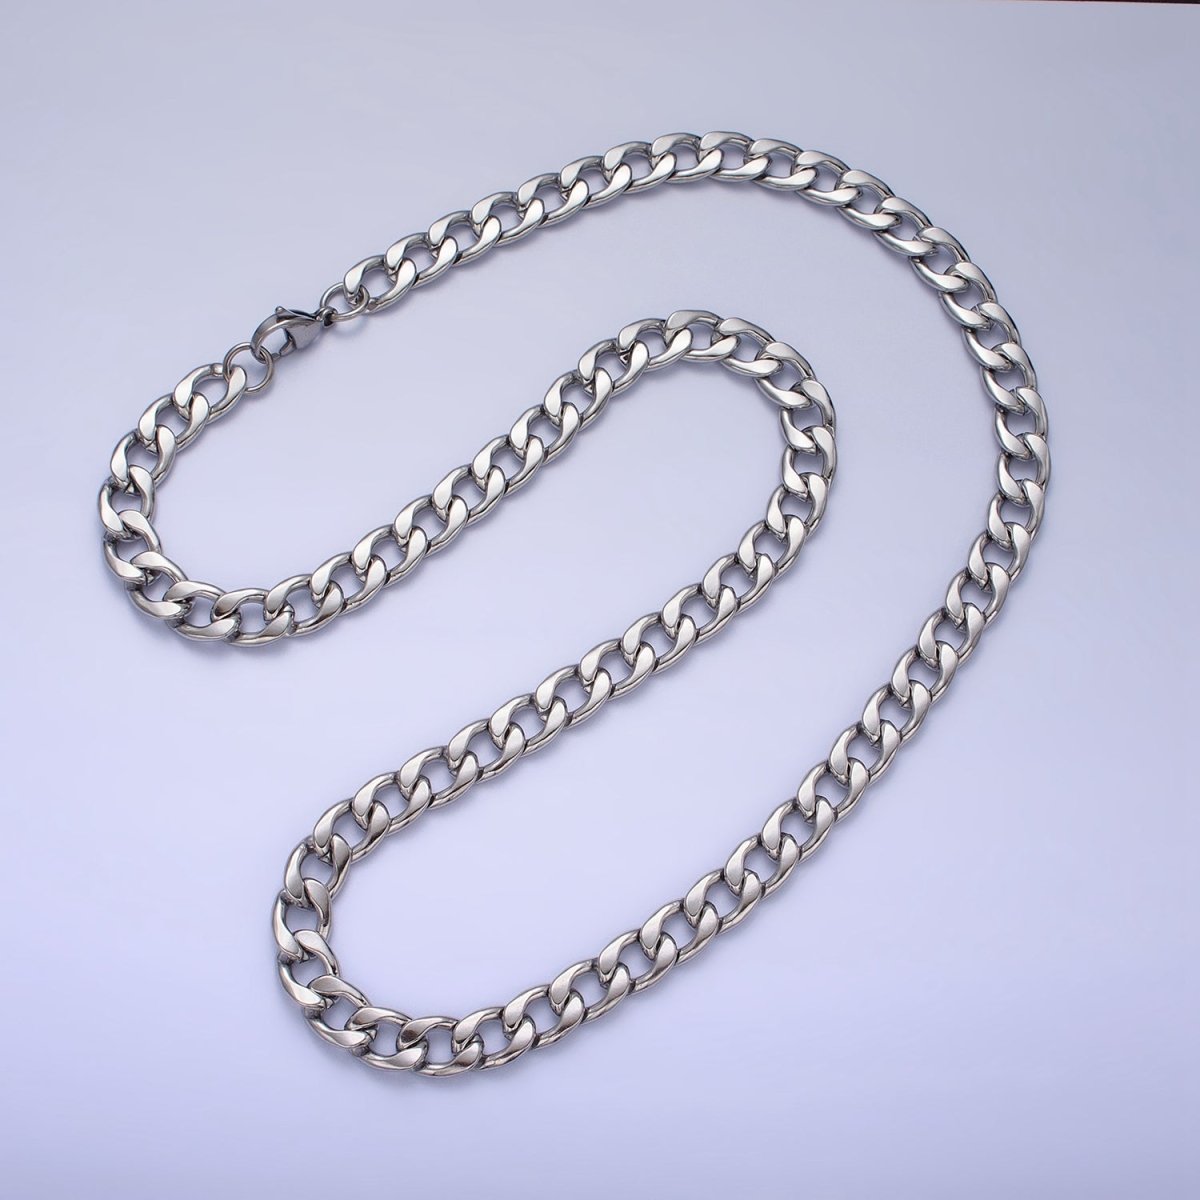 Long Gold Miami Cuban Curb Chain Necklace Stainless Steel 8.5mm Thick Men's Chain 23.5 inch Necklace | WA-1589 WA-1590 Clearance Pricing - DLUXCA